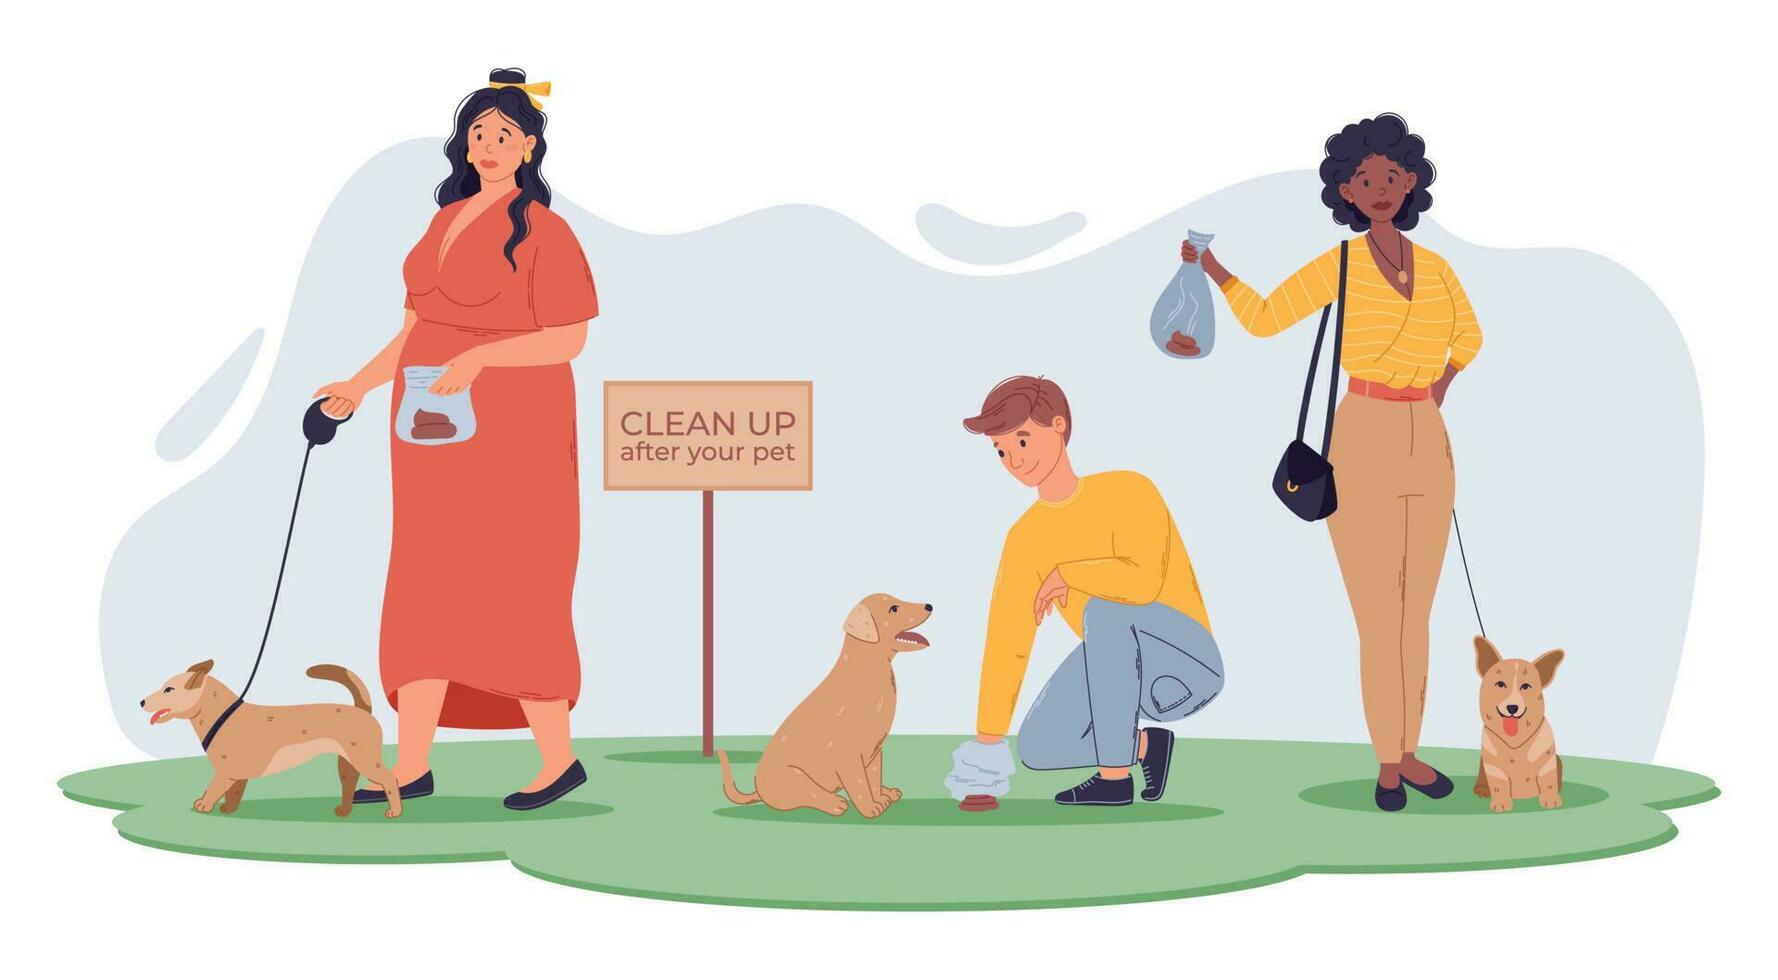 Clean up after your animals concept. Flat People walking their dogs on a leash in the park. Collecting animal excrement in a plastic bag. Vector isolated cartoon illustration of people.